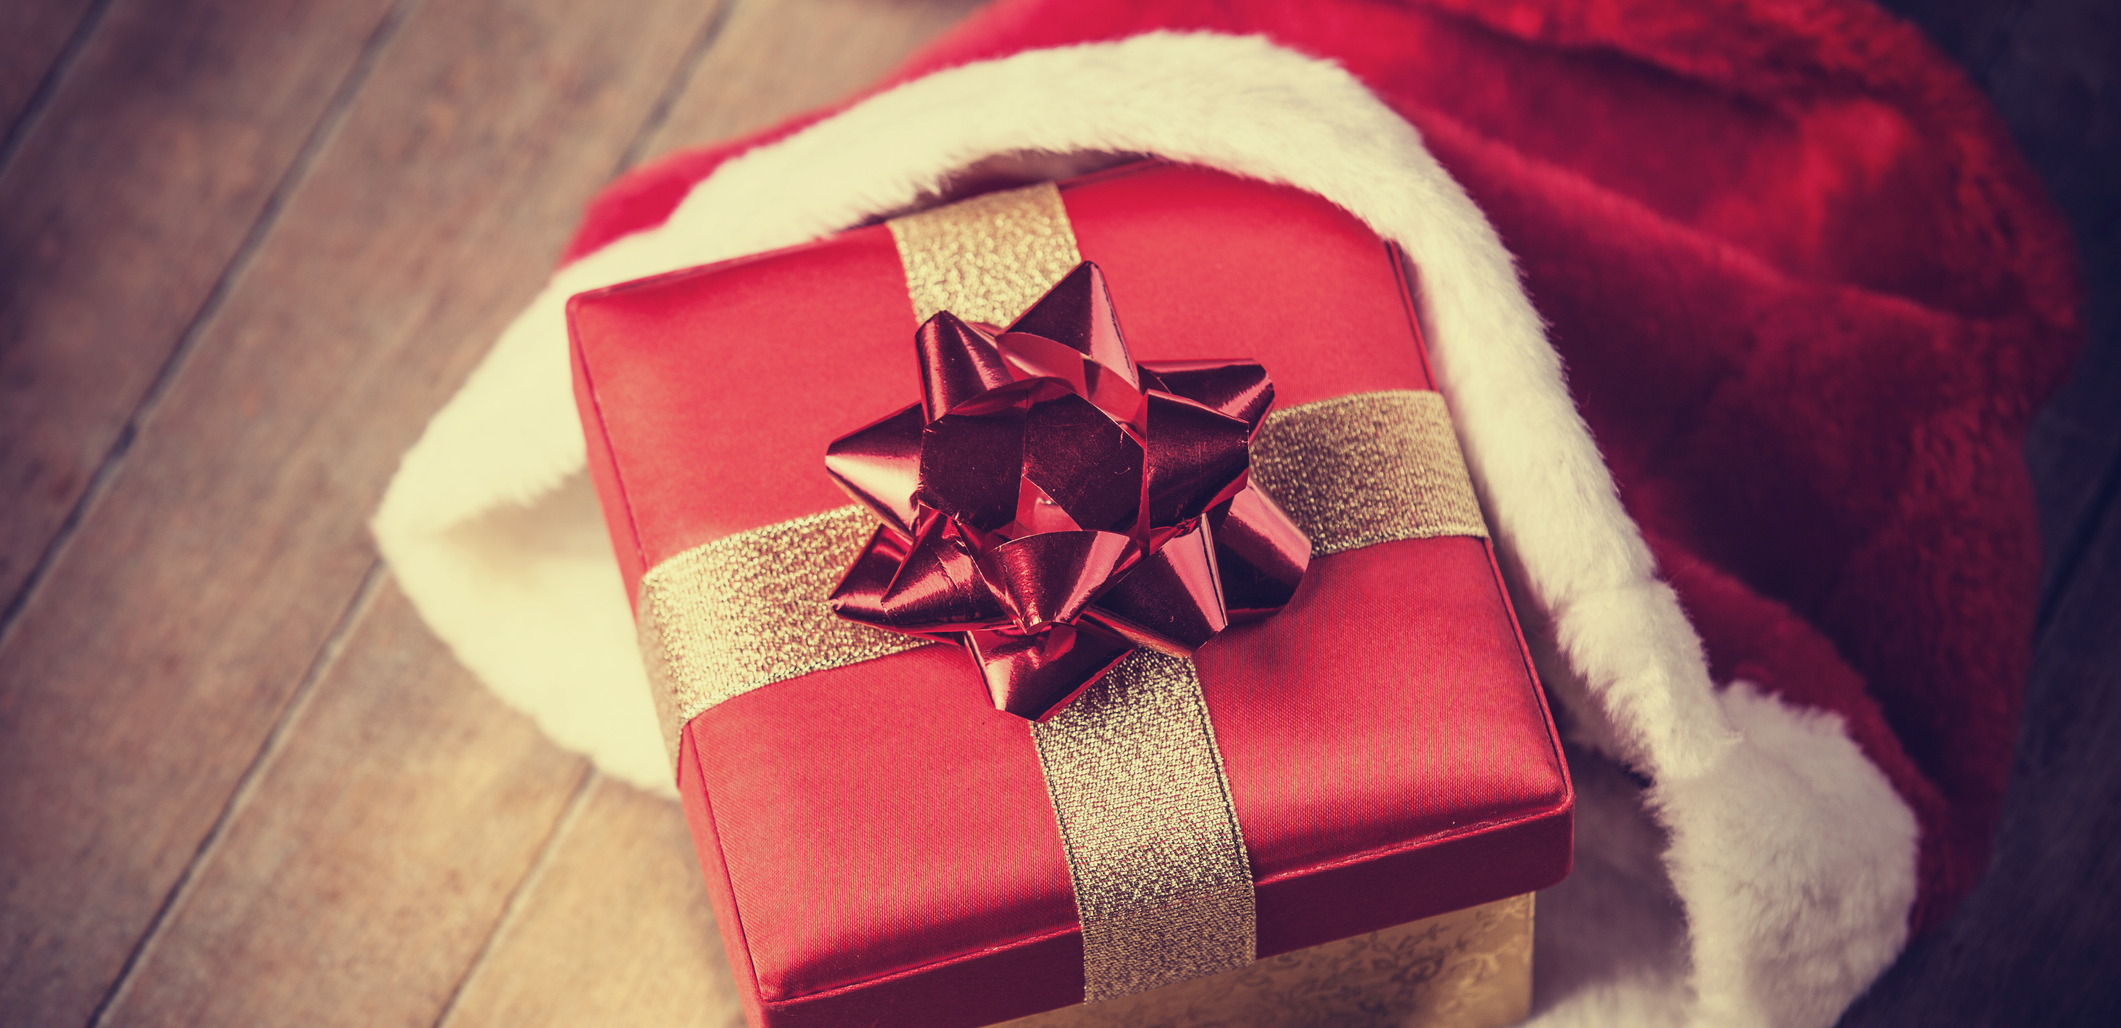 10 email tactics to drive more sales this holiday season Featured Image